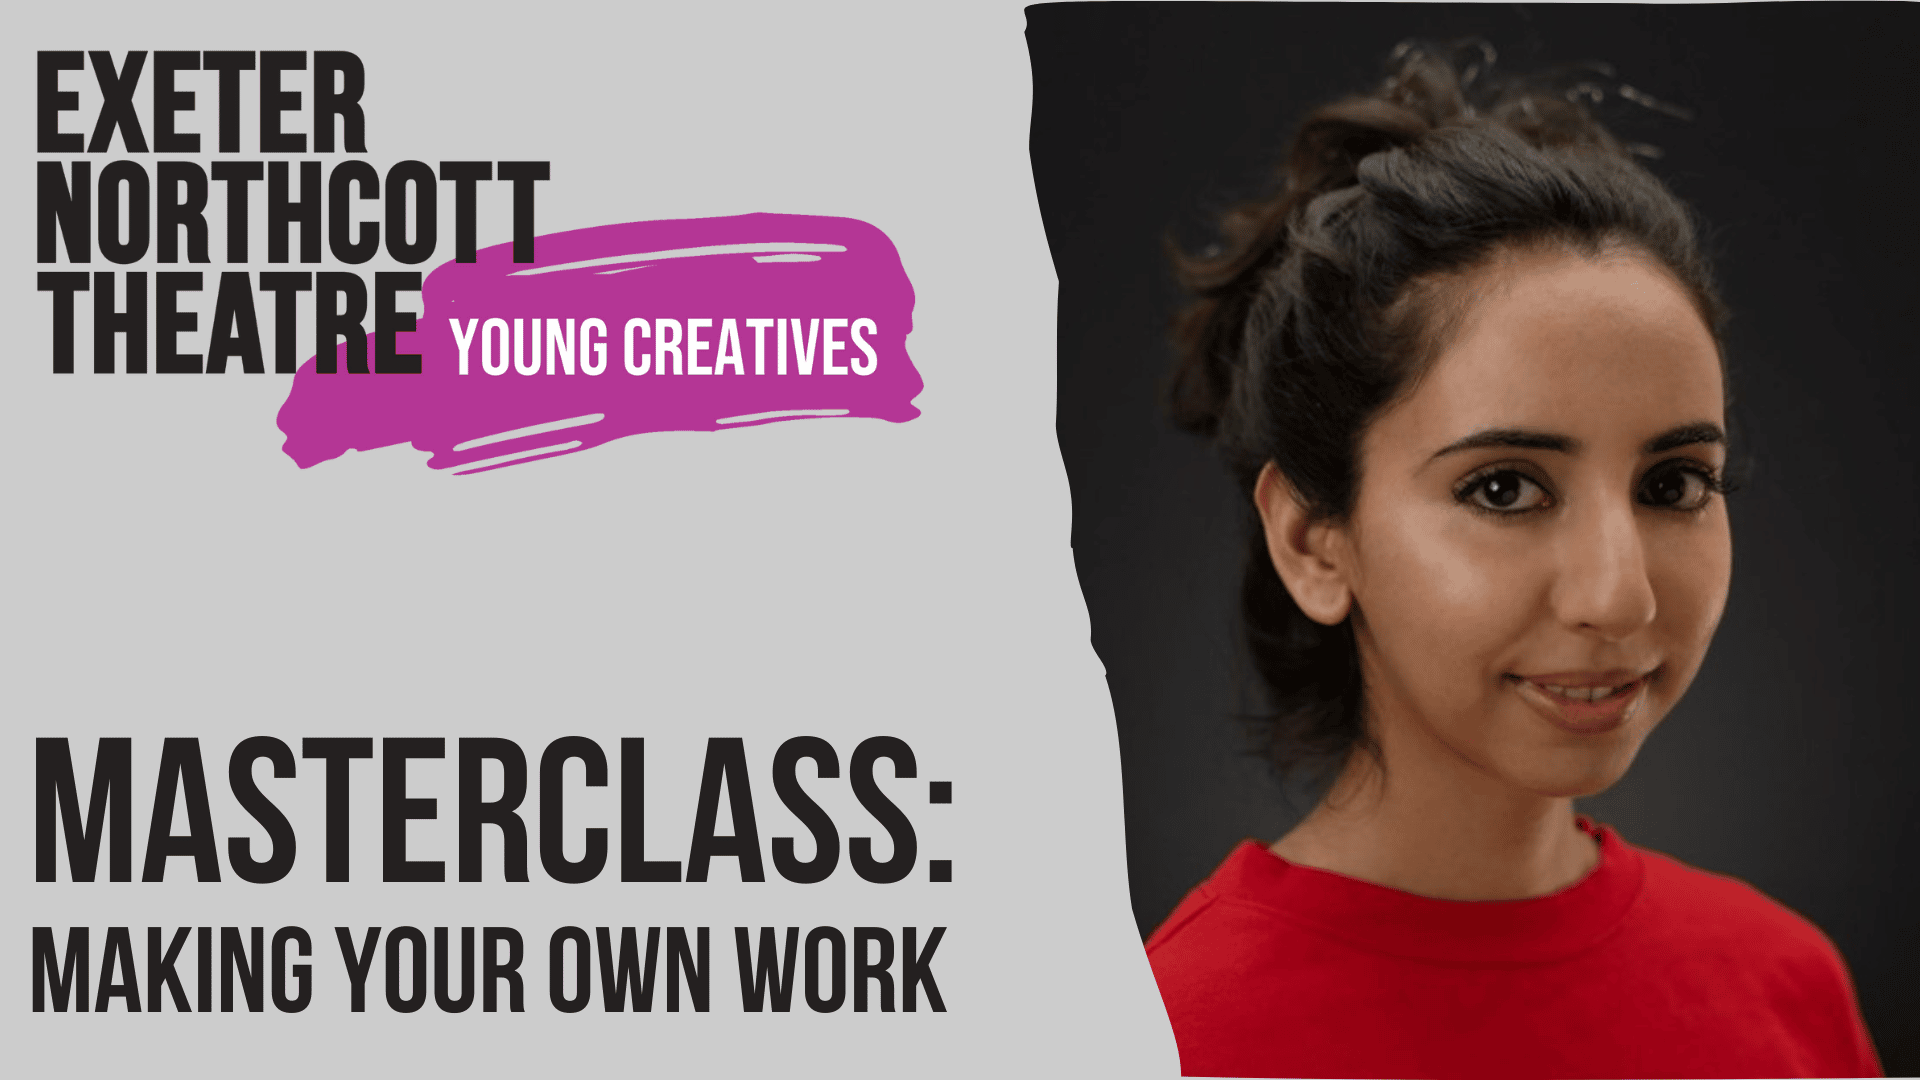 Exeter Northcott Young Creatives Masterclass: Making your own work